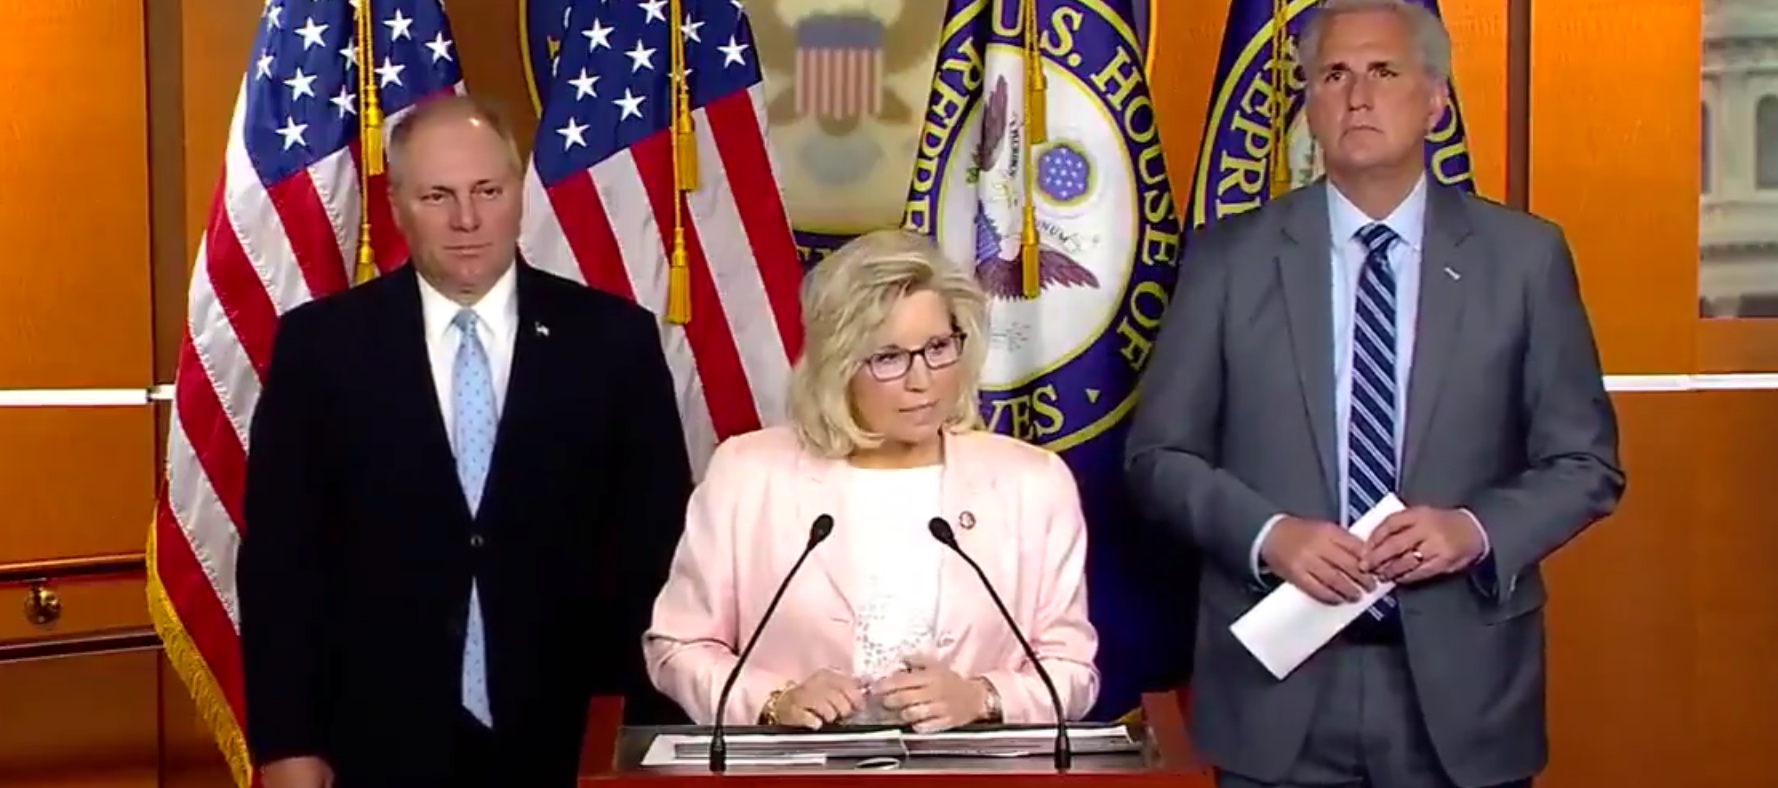 Wyoming Republican Rep. Liz Cheney holds a news conference to discuss the decision by the House Judiciary Committee to hold Attorney General William Barr in contempt of Congress, May 8, 2019. Twitter screencapture.